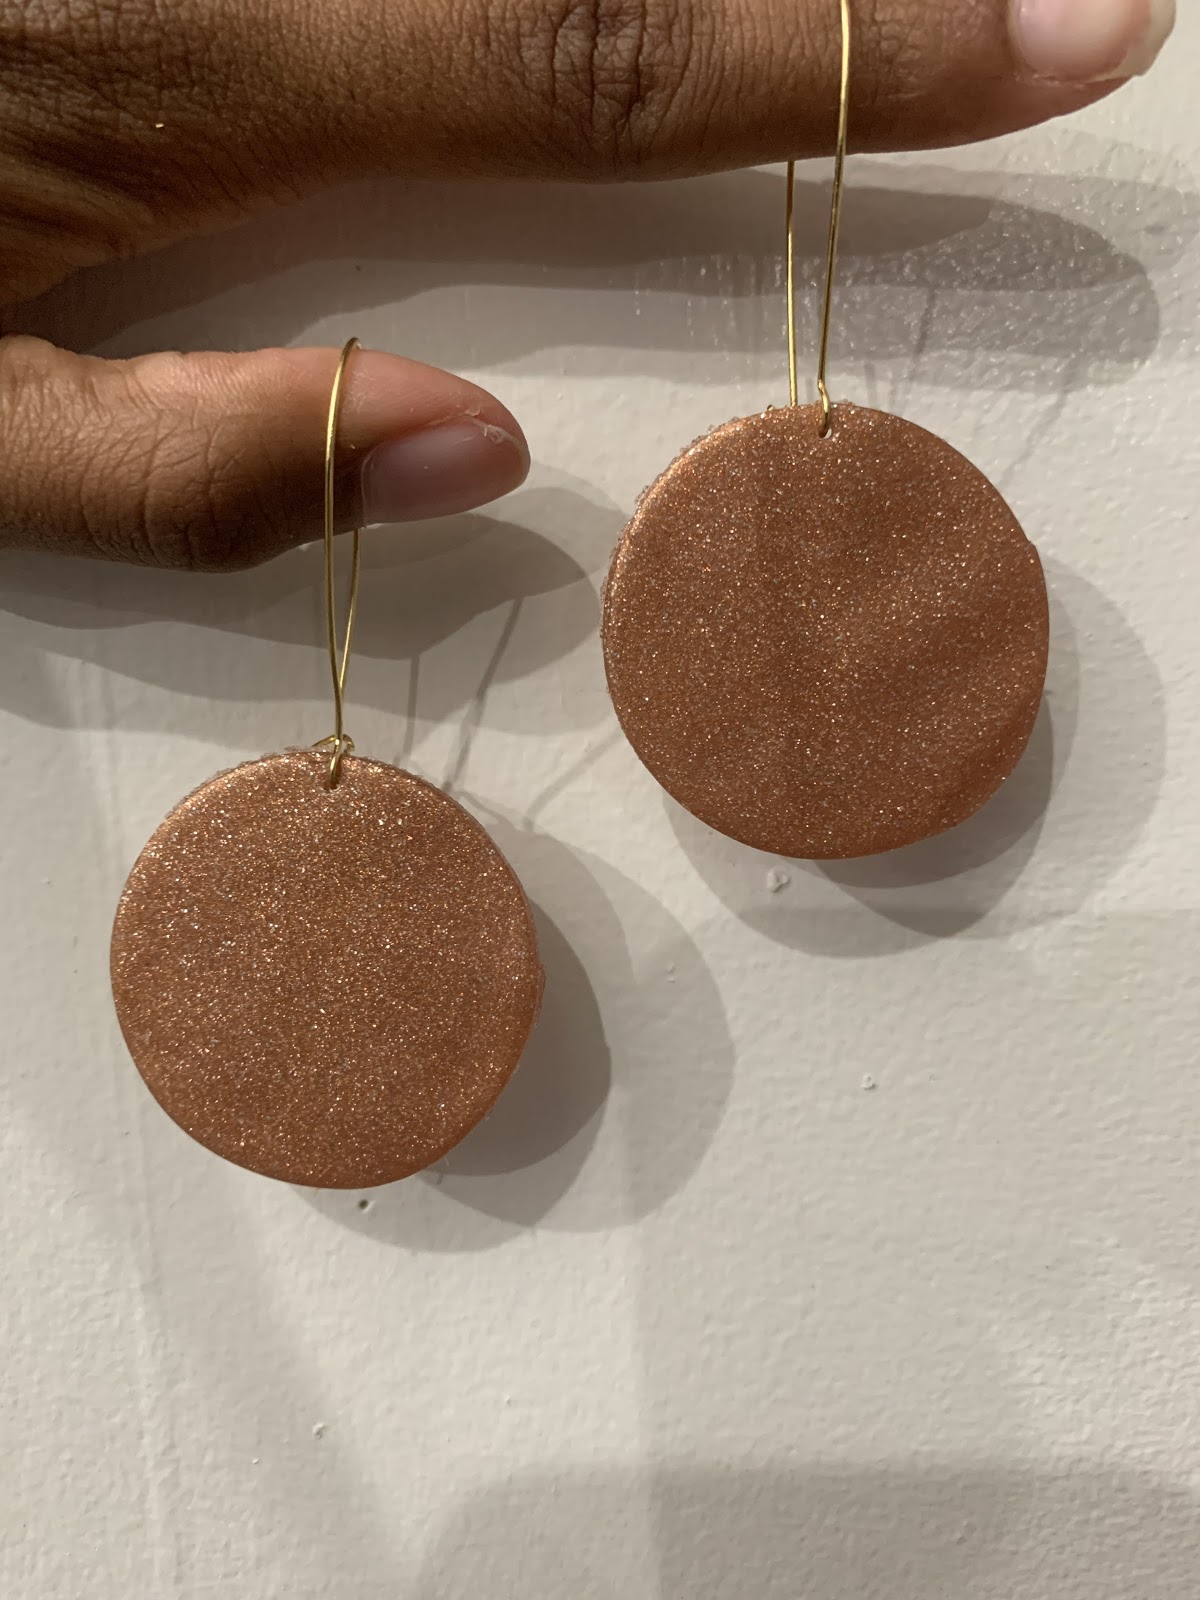 Bronze circular clay earrings with hanging thin wires hanging on two brown skinned fingers, against a white background.